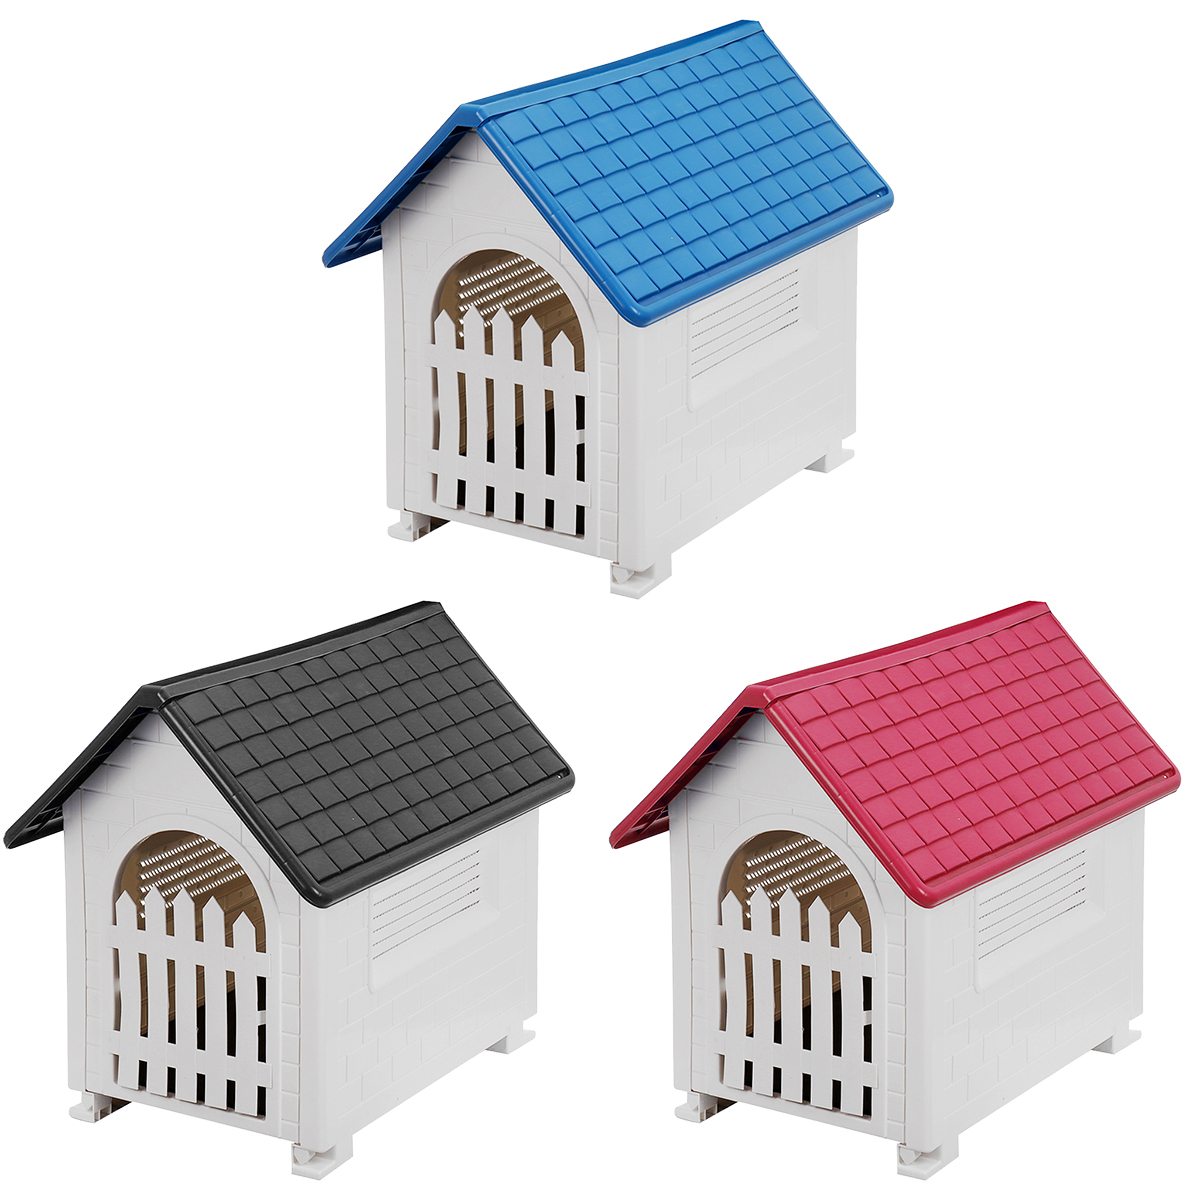 Foldable-Plastic-Pets-Dogs-Houses-Cages-Small-Outdoors-Waterproof-Warm-Removable-Washable-With-Kenne-1849921-10